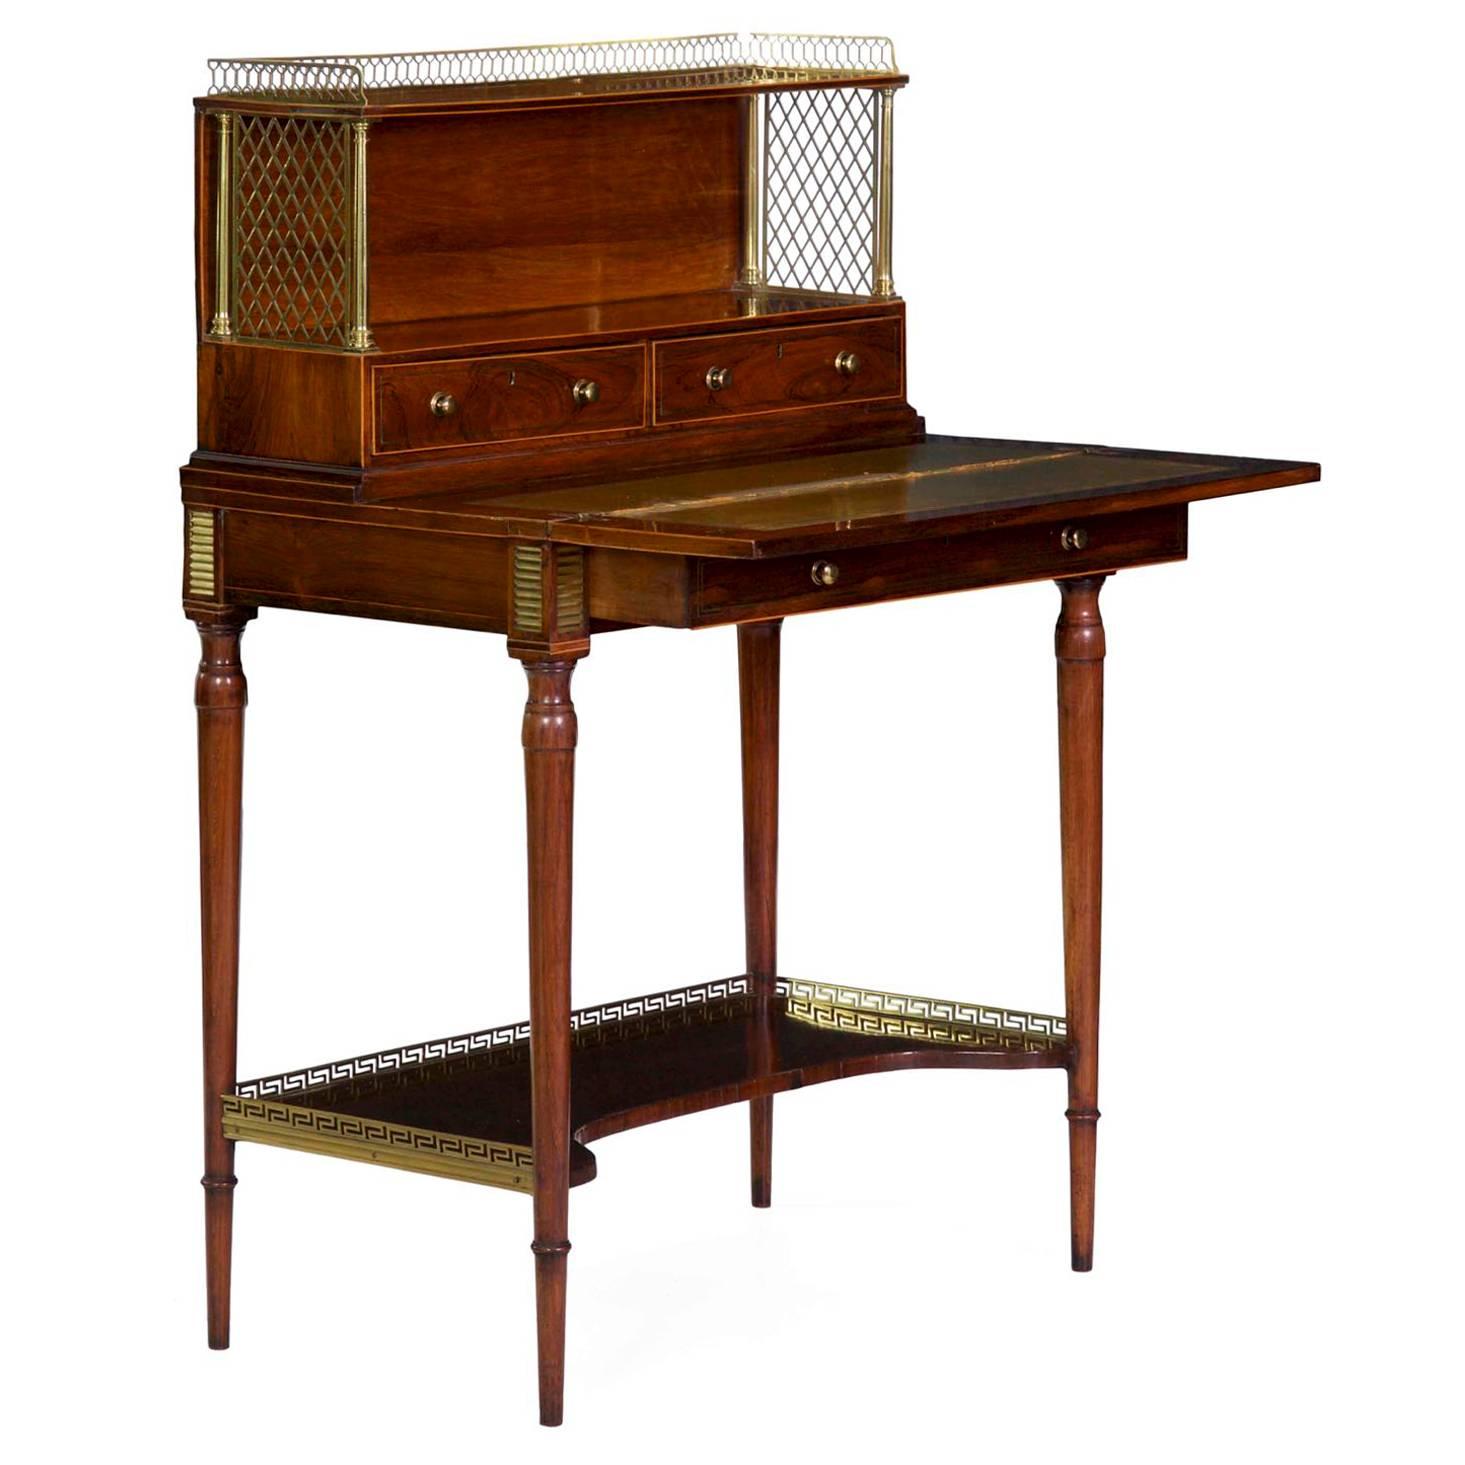 This Regency period writing desk is of exceedingly exact craftsmanship, precise in joinery and design, a very finely made piece by every measure.  It is designed in the French taste, an English creation inspired by contemporary works in the Louis